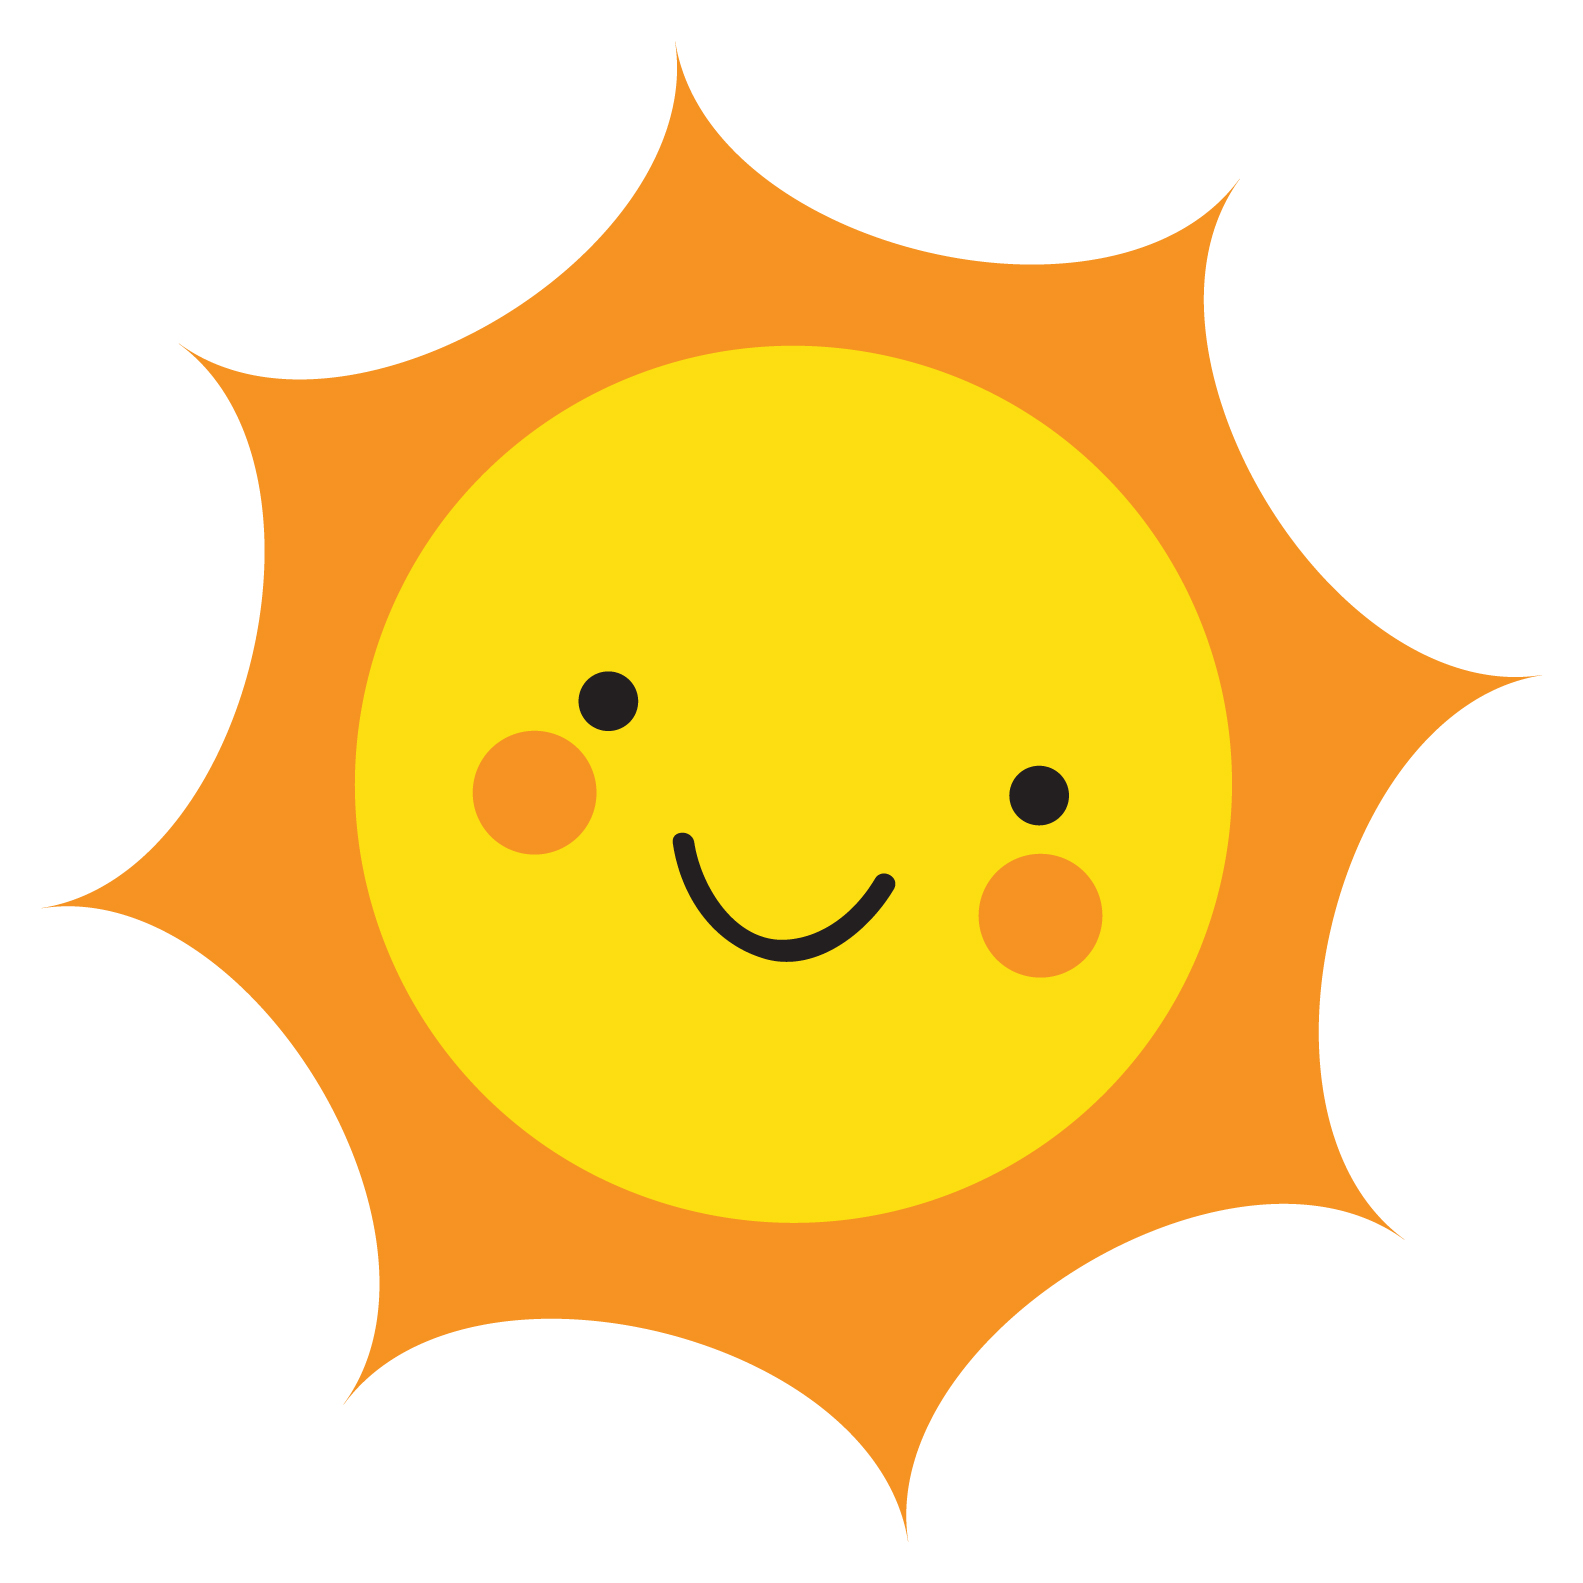 Clip Arts Related To : clipart sunny. 